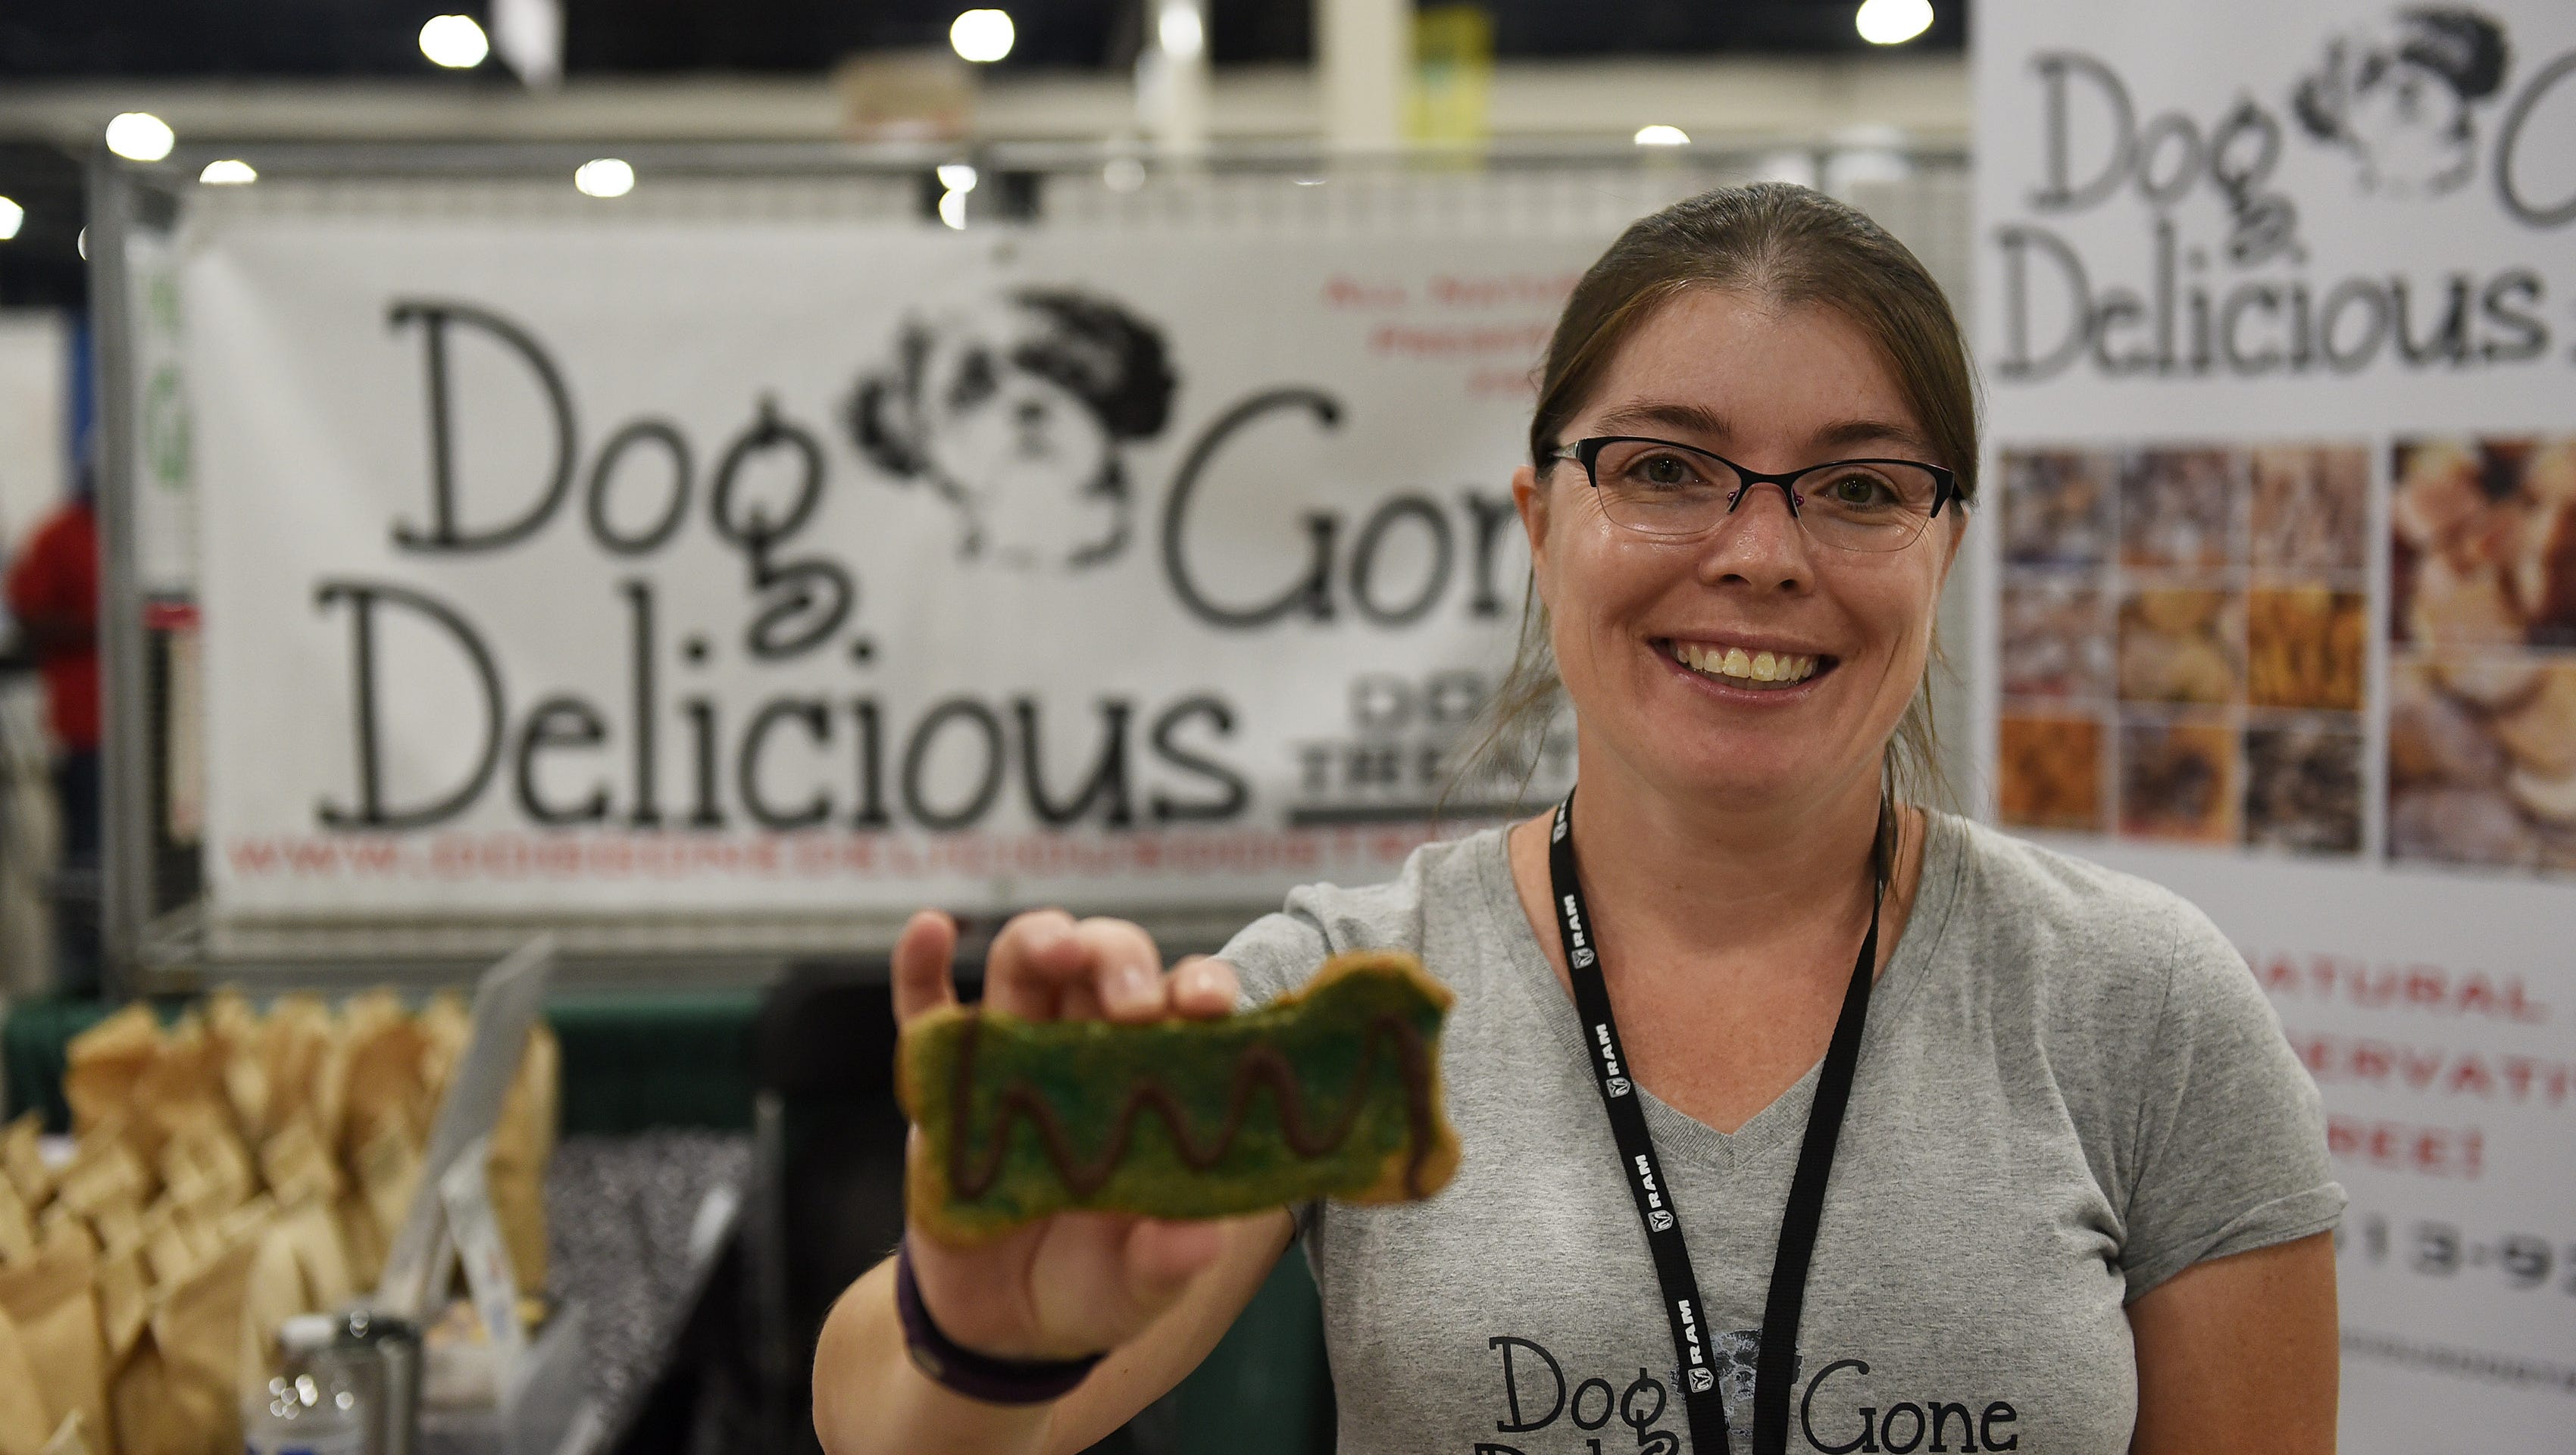 Dawn Sommers, owner of Dog Gone Delicious Dog Treats, shows off one of her peanut butter dog bones at her booth.